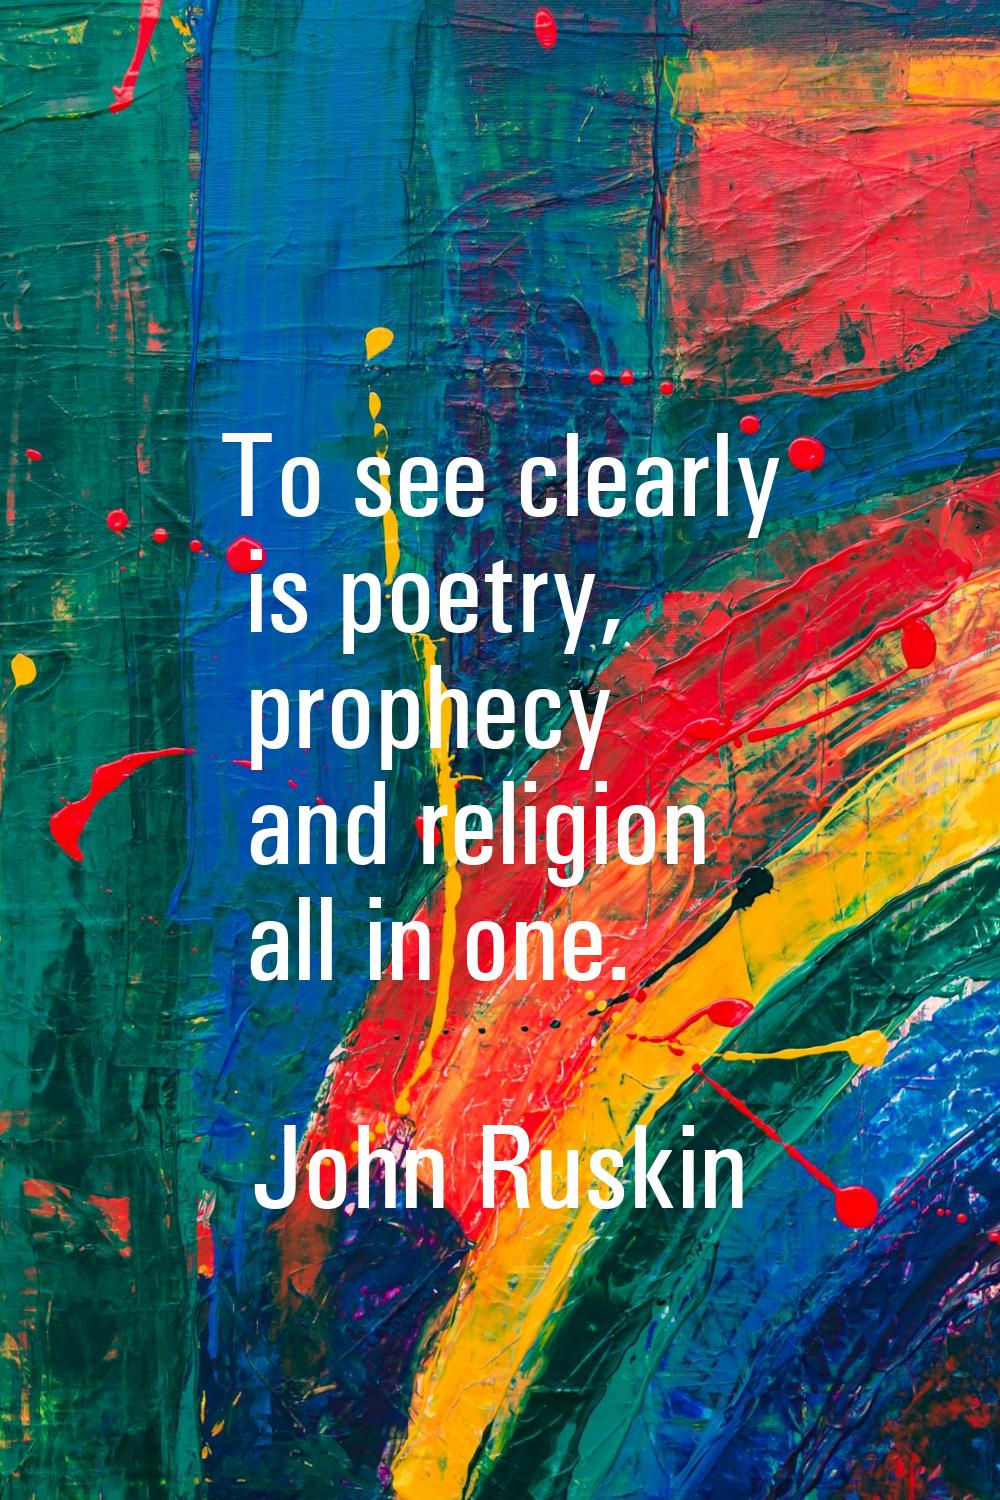 To see clearly is poetry, prophecy and religion all in one.